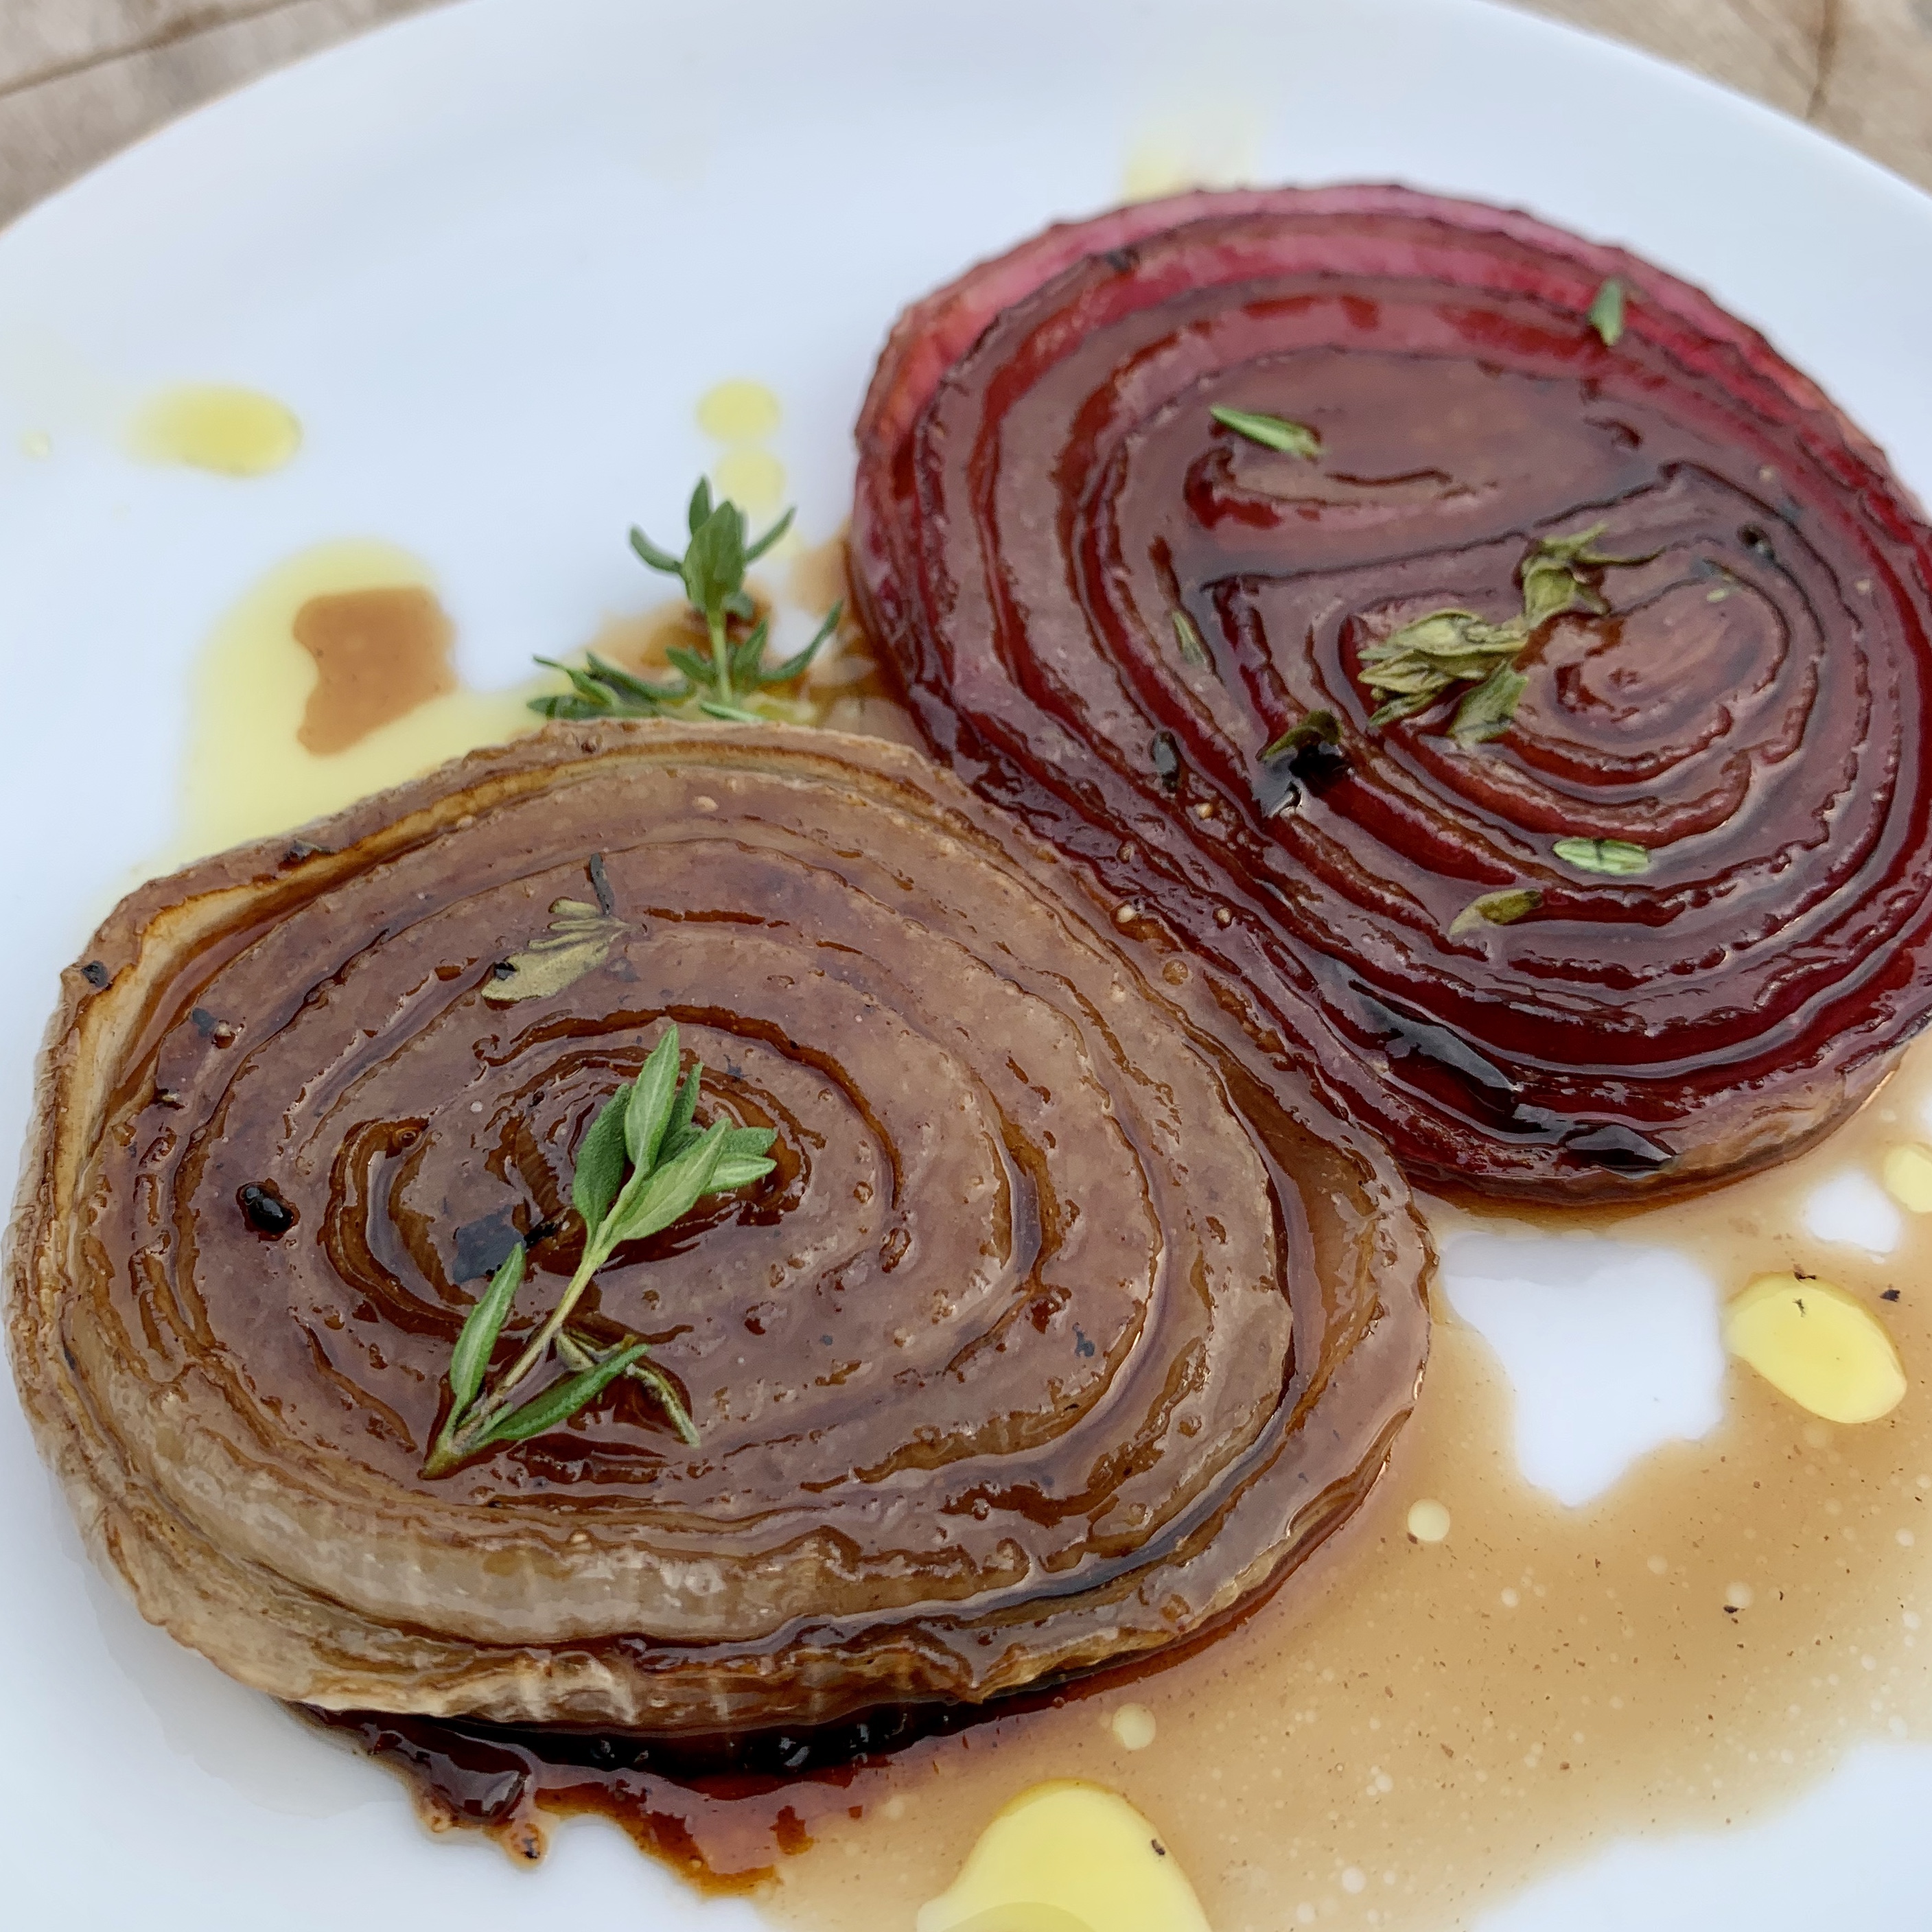 Pear Infused Balsamic Glazed Onions